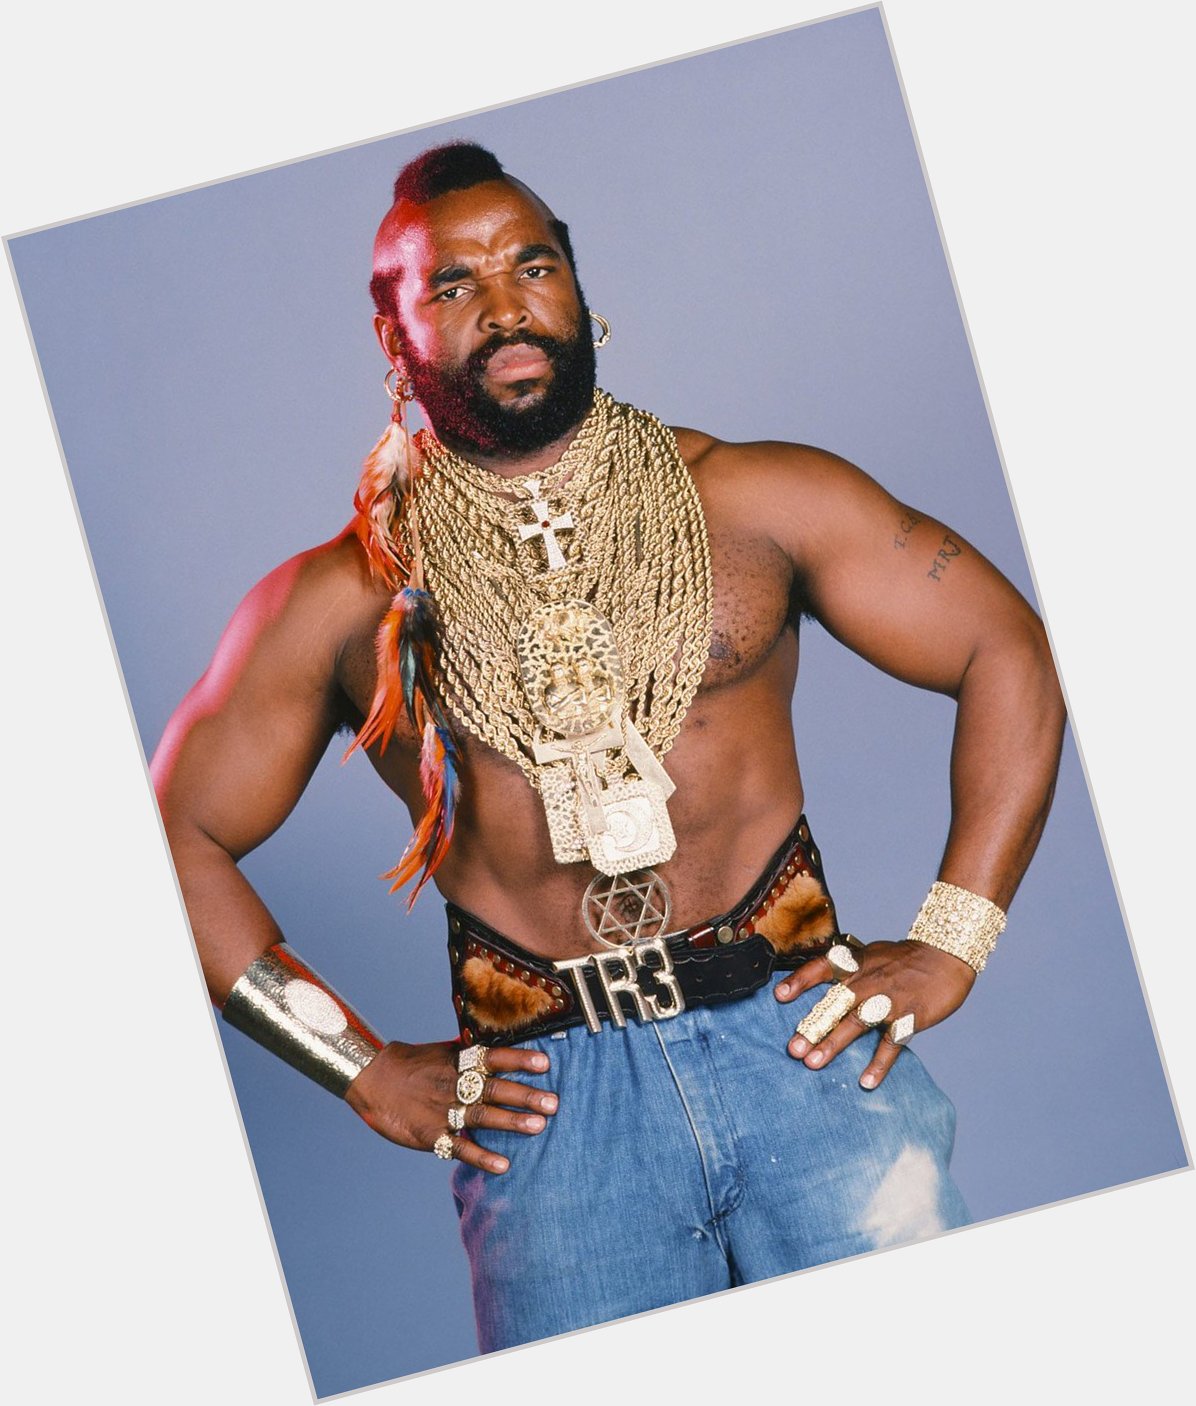 Happy Birthday to WWE Hall of Famer Mr. T who turns 66 today! 